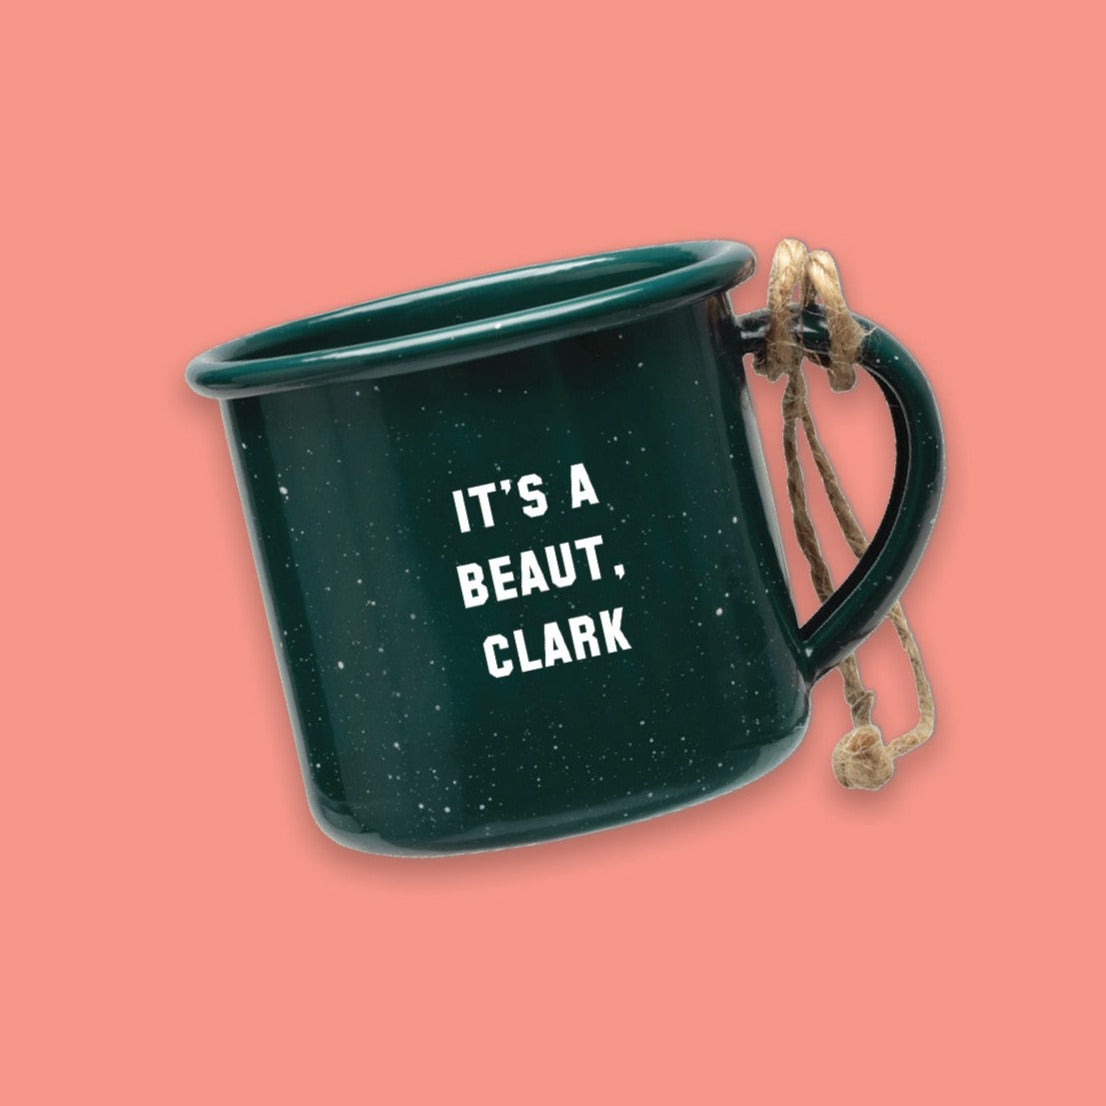 On a coral pink background sits a dark green mini campfire mug with white specks. It says "IT'S A BEAUT, CLARK" in white collegiate lettering. It has twine on the handle.